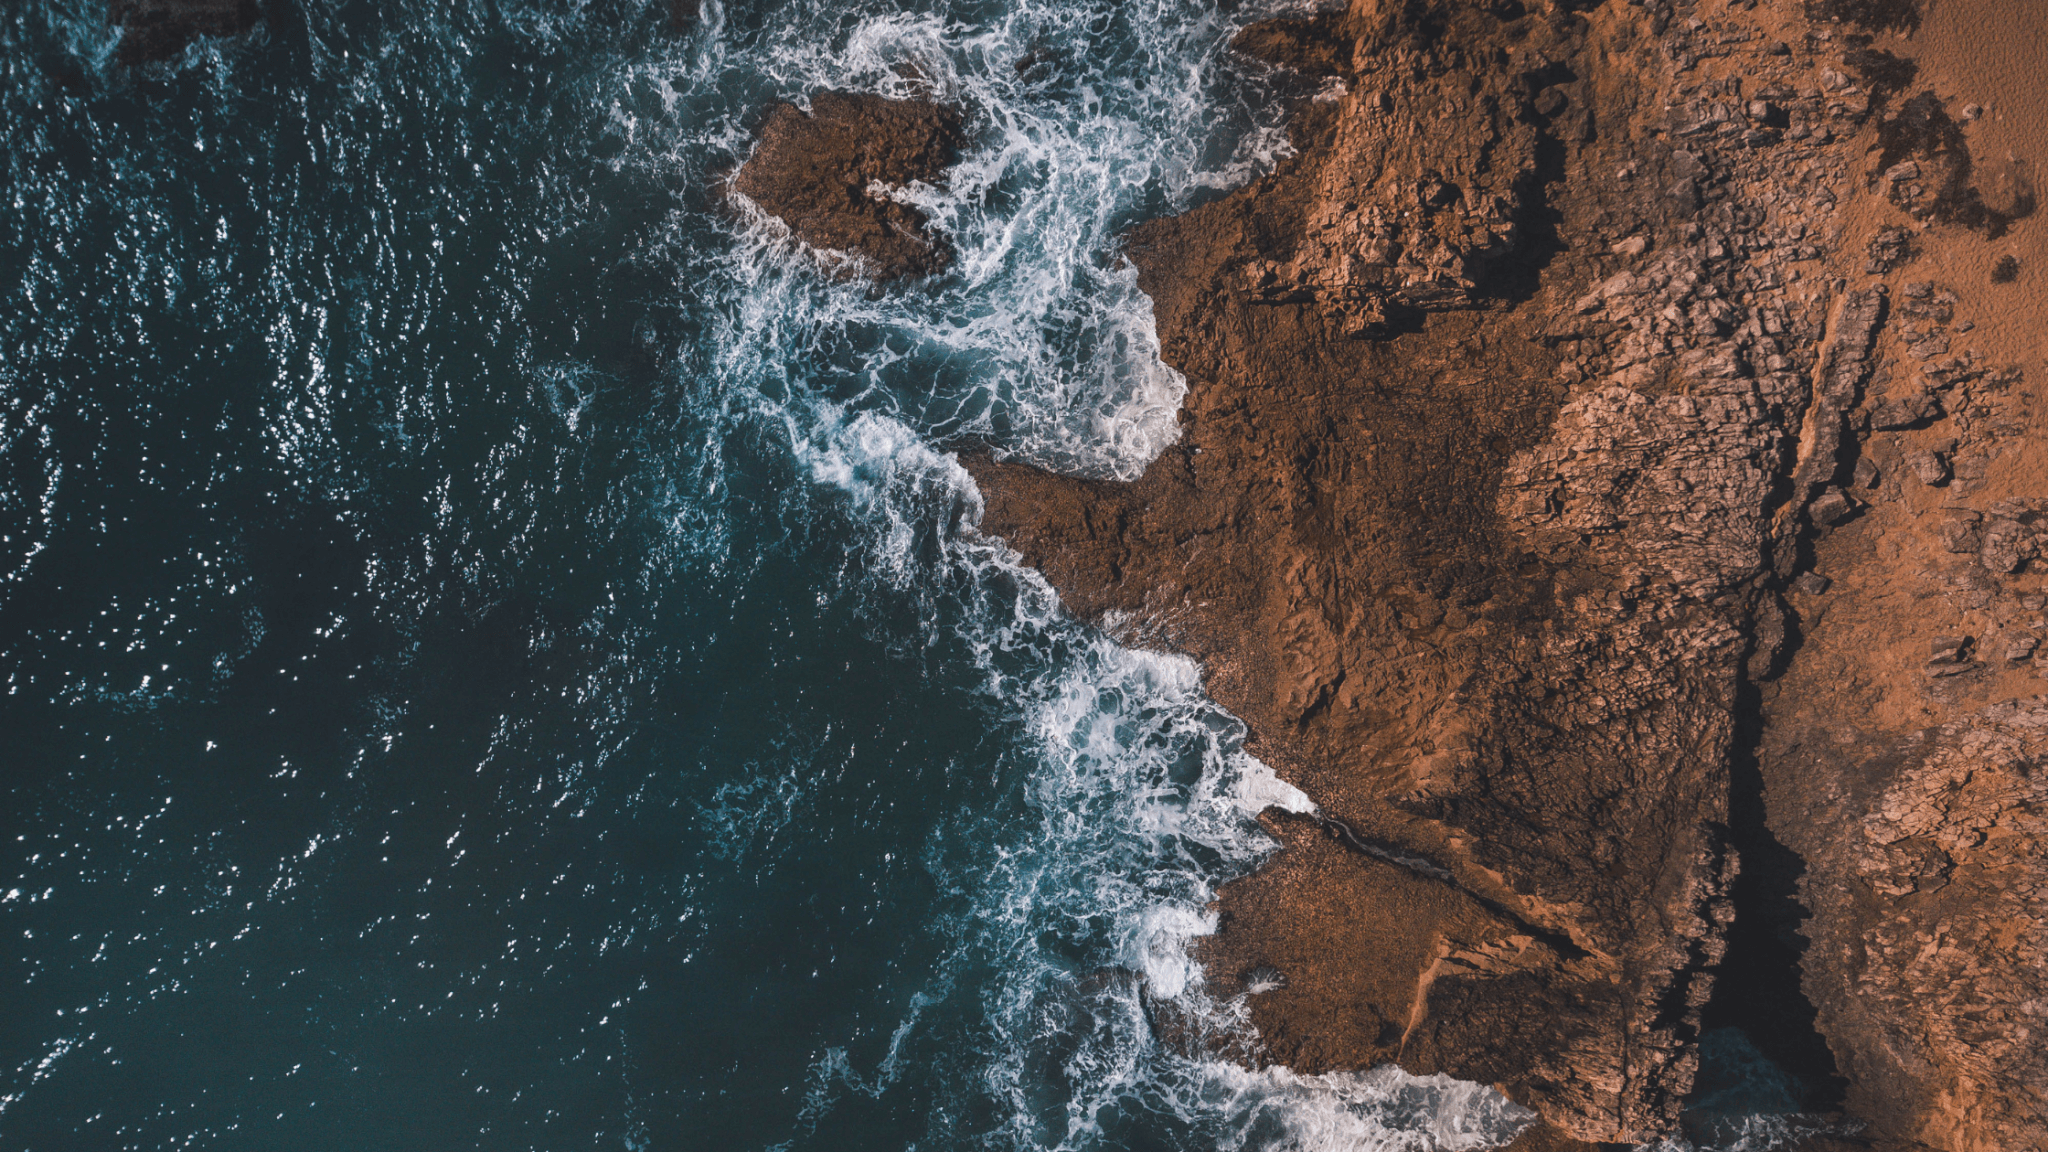 Overhead shot of waves crashing on the shore, forming an artistic organic pattern